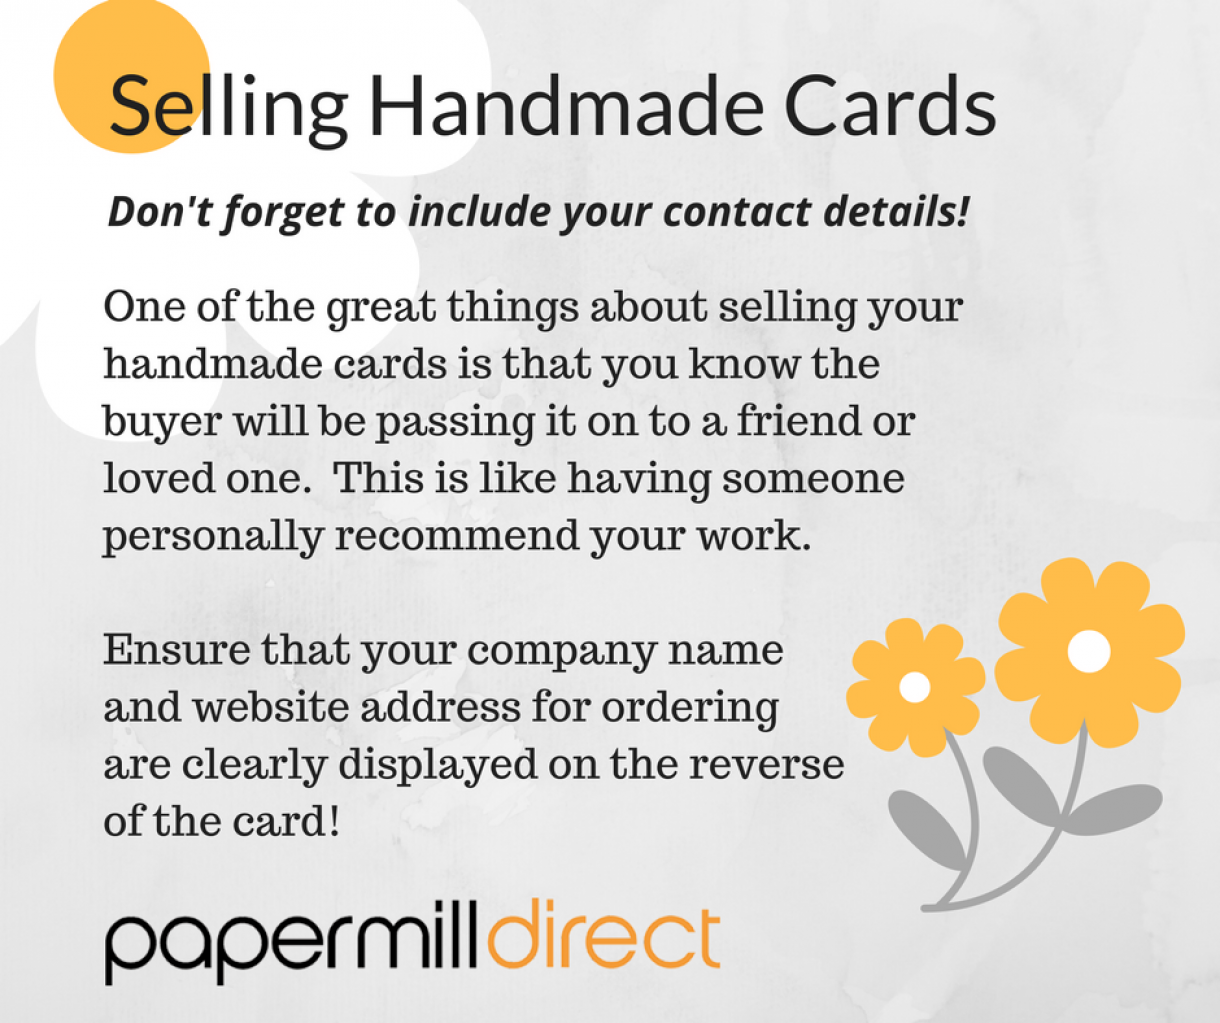 Selling  Handmade  Cards Adding Contact Details